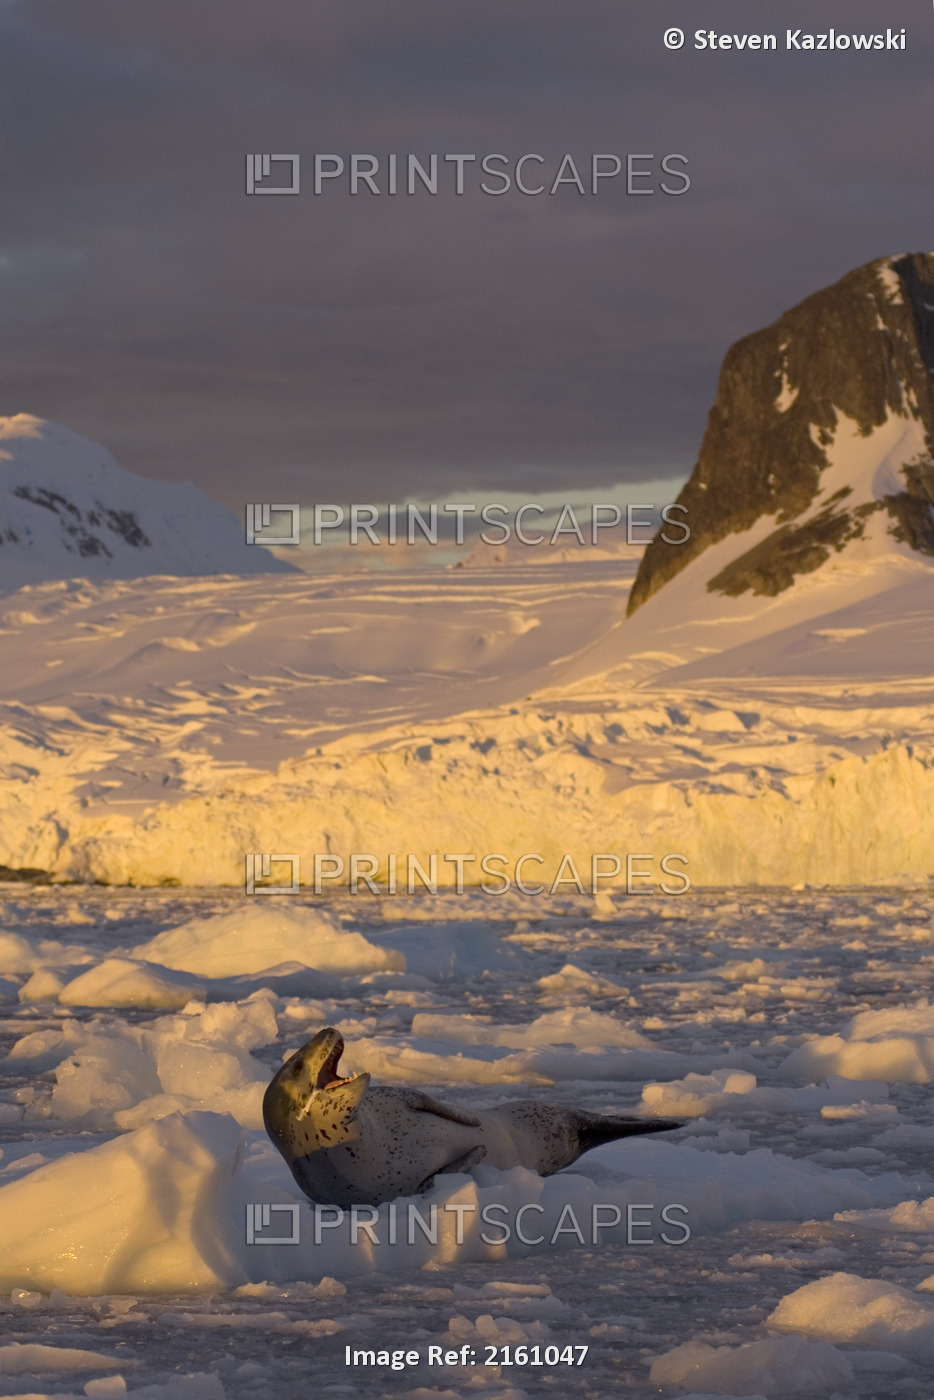 Lone Leopard Seal Resting On The Glacial Ice Along The Western Antarctic ...